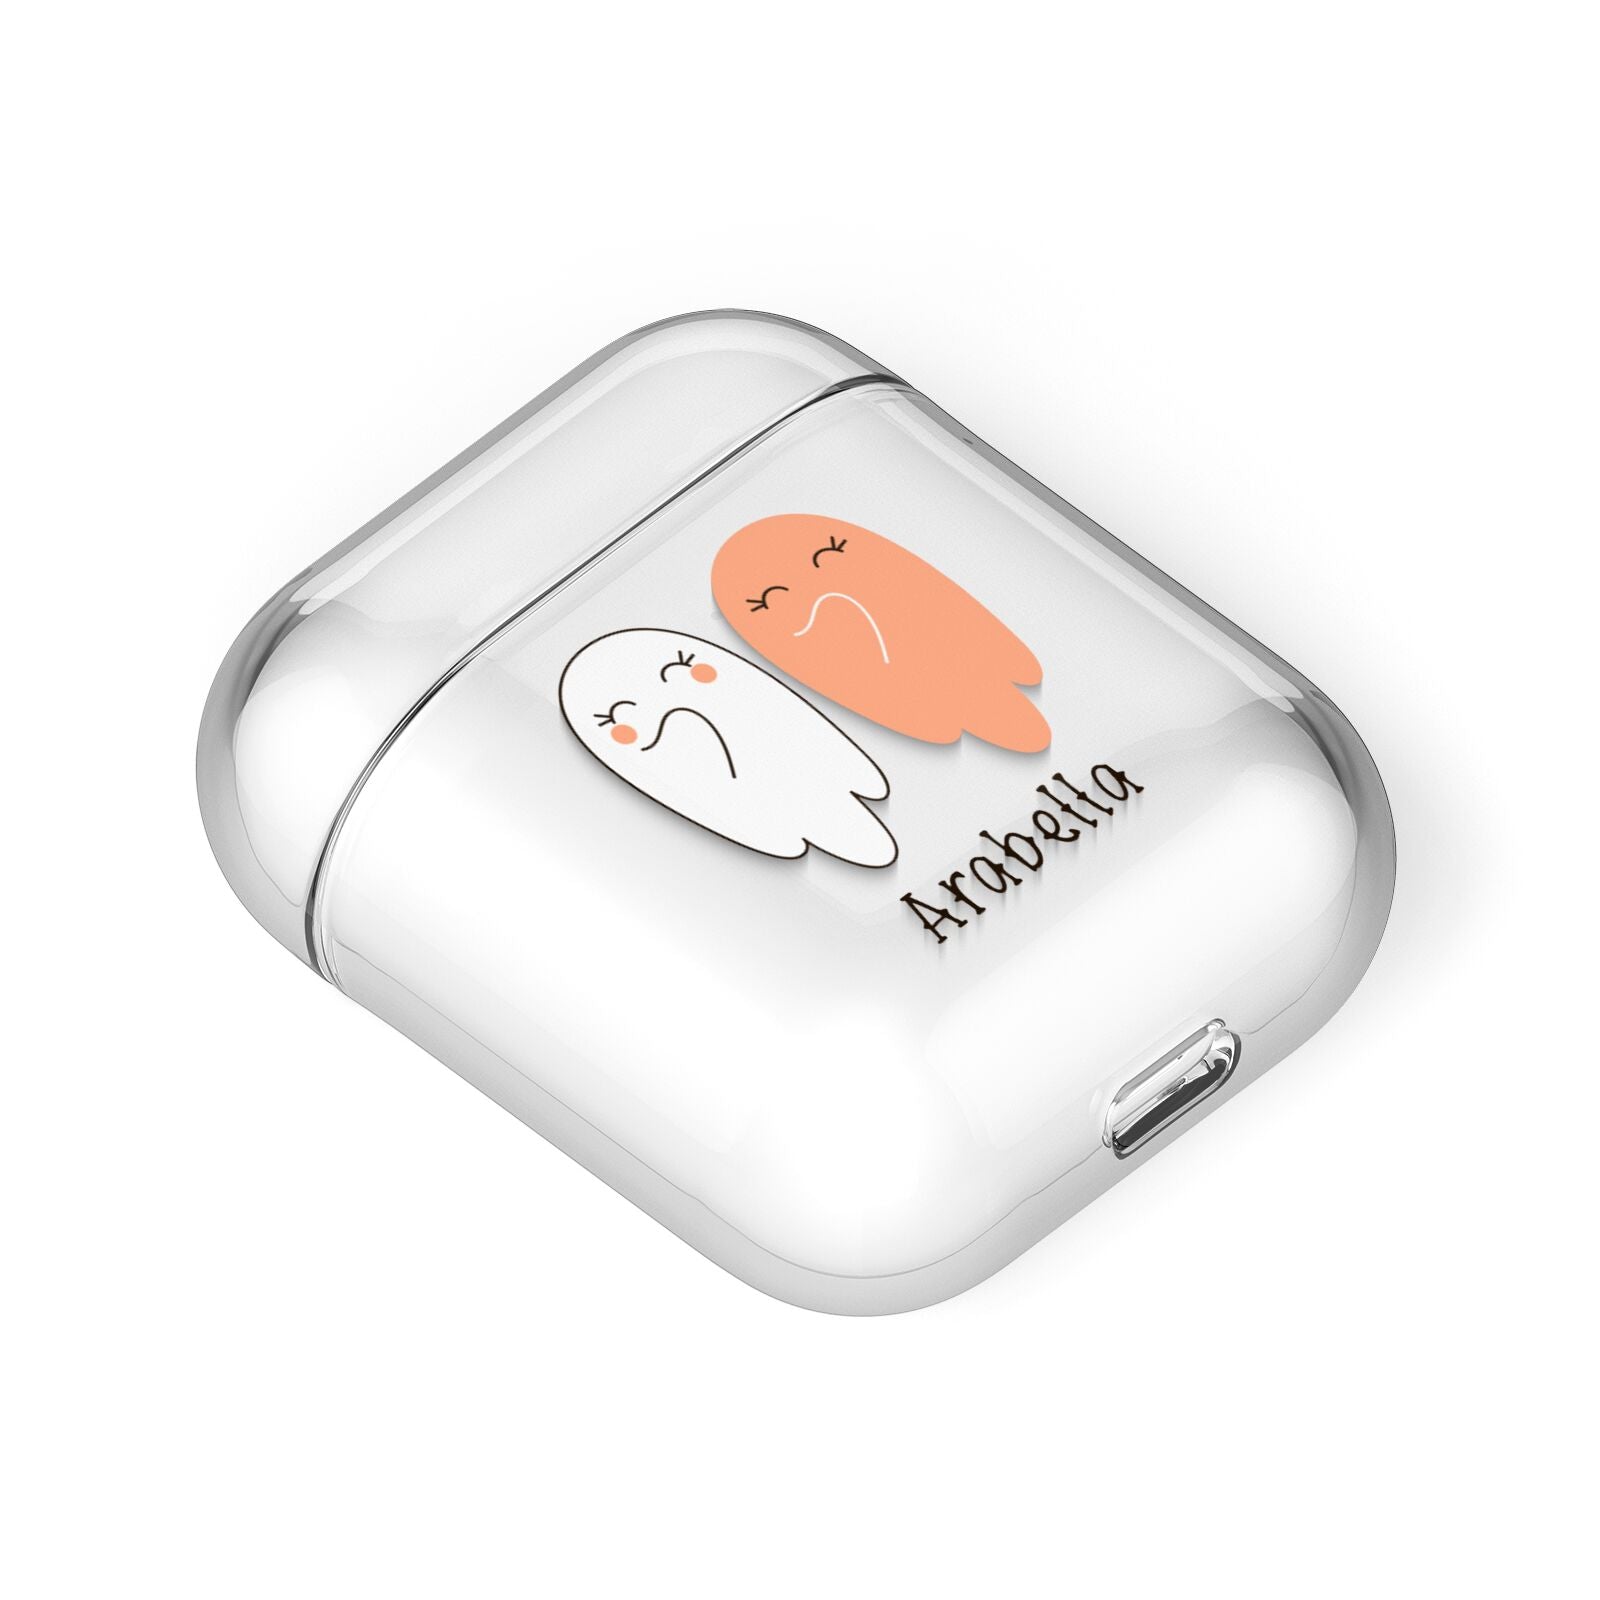 Two Ghosts AirPods Case Laid Flat